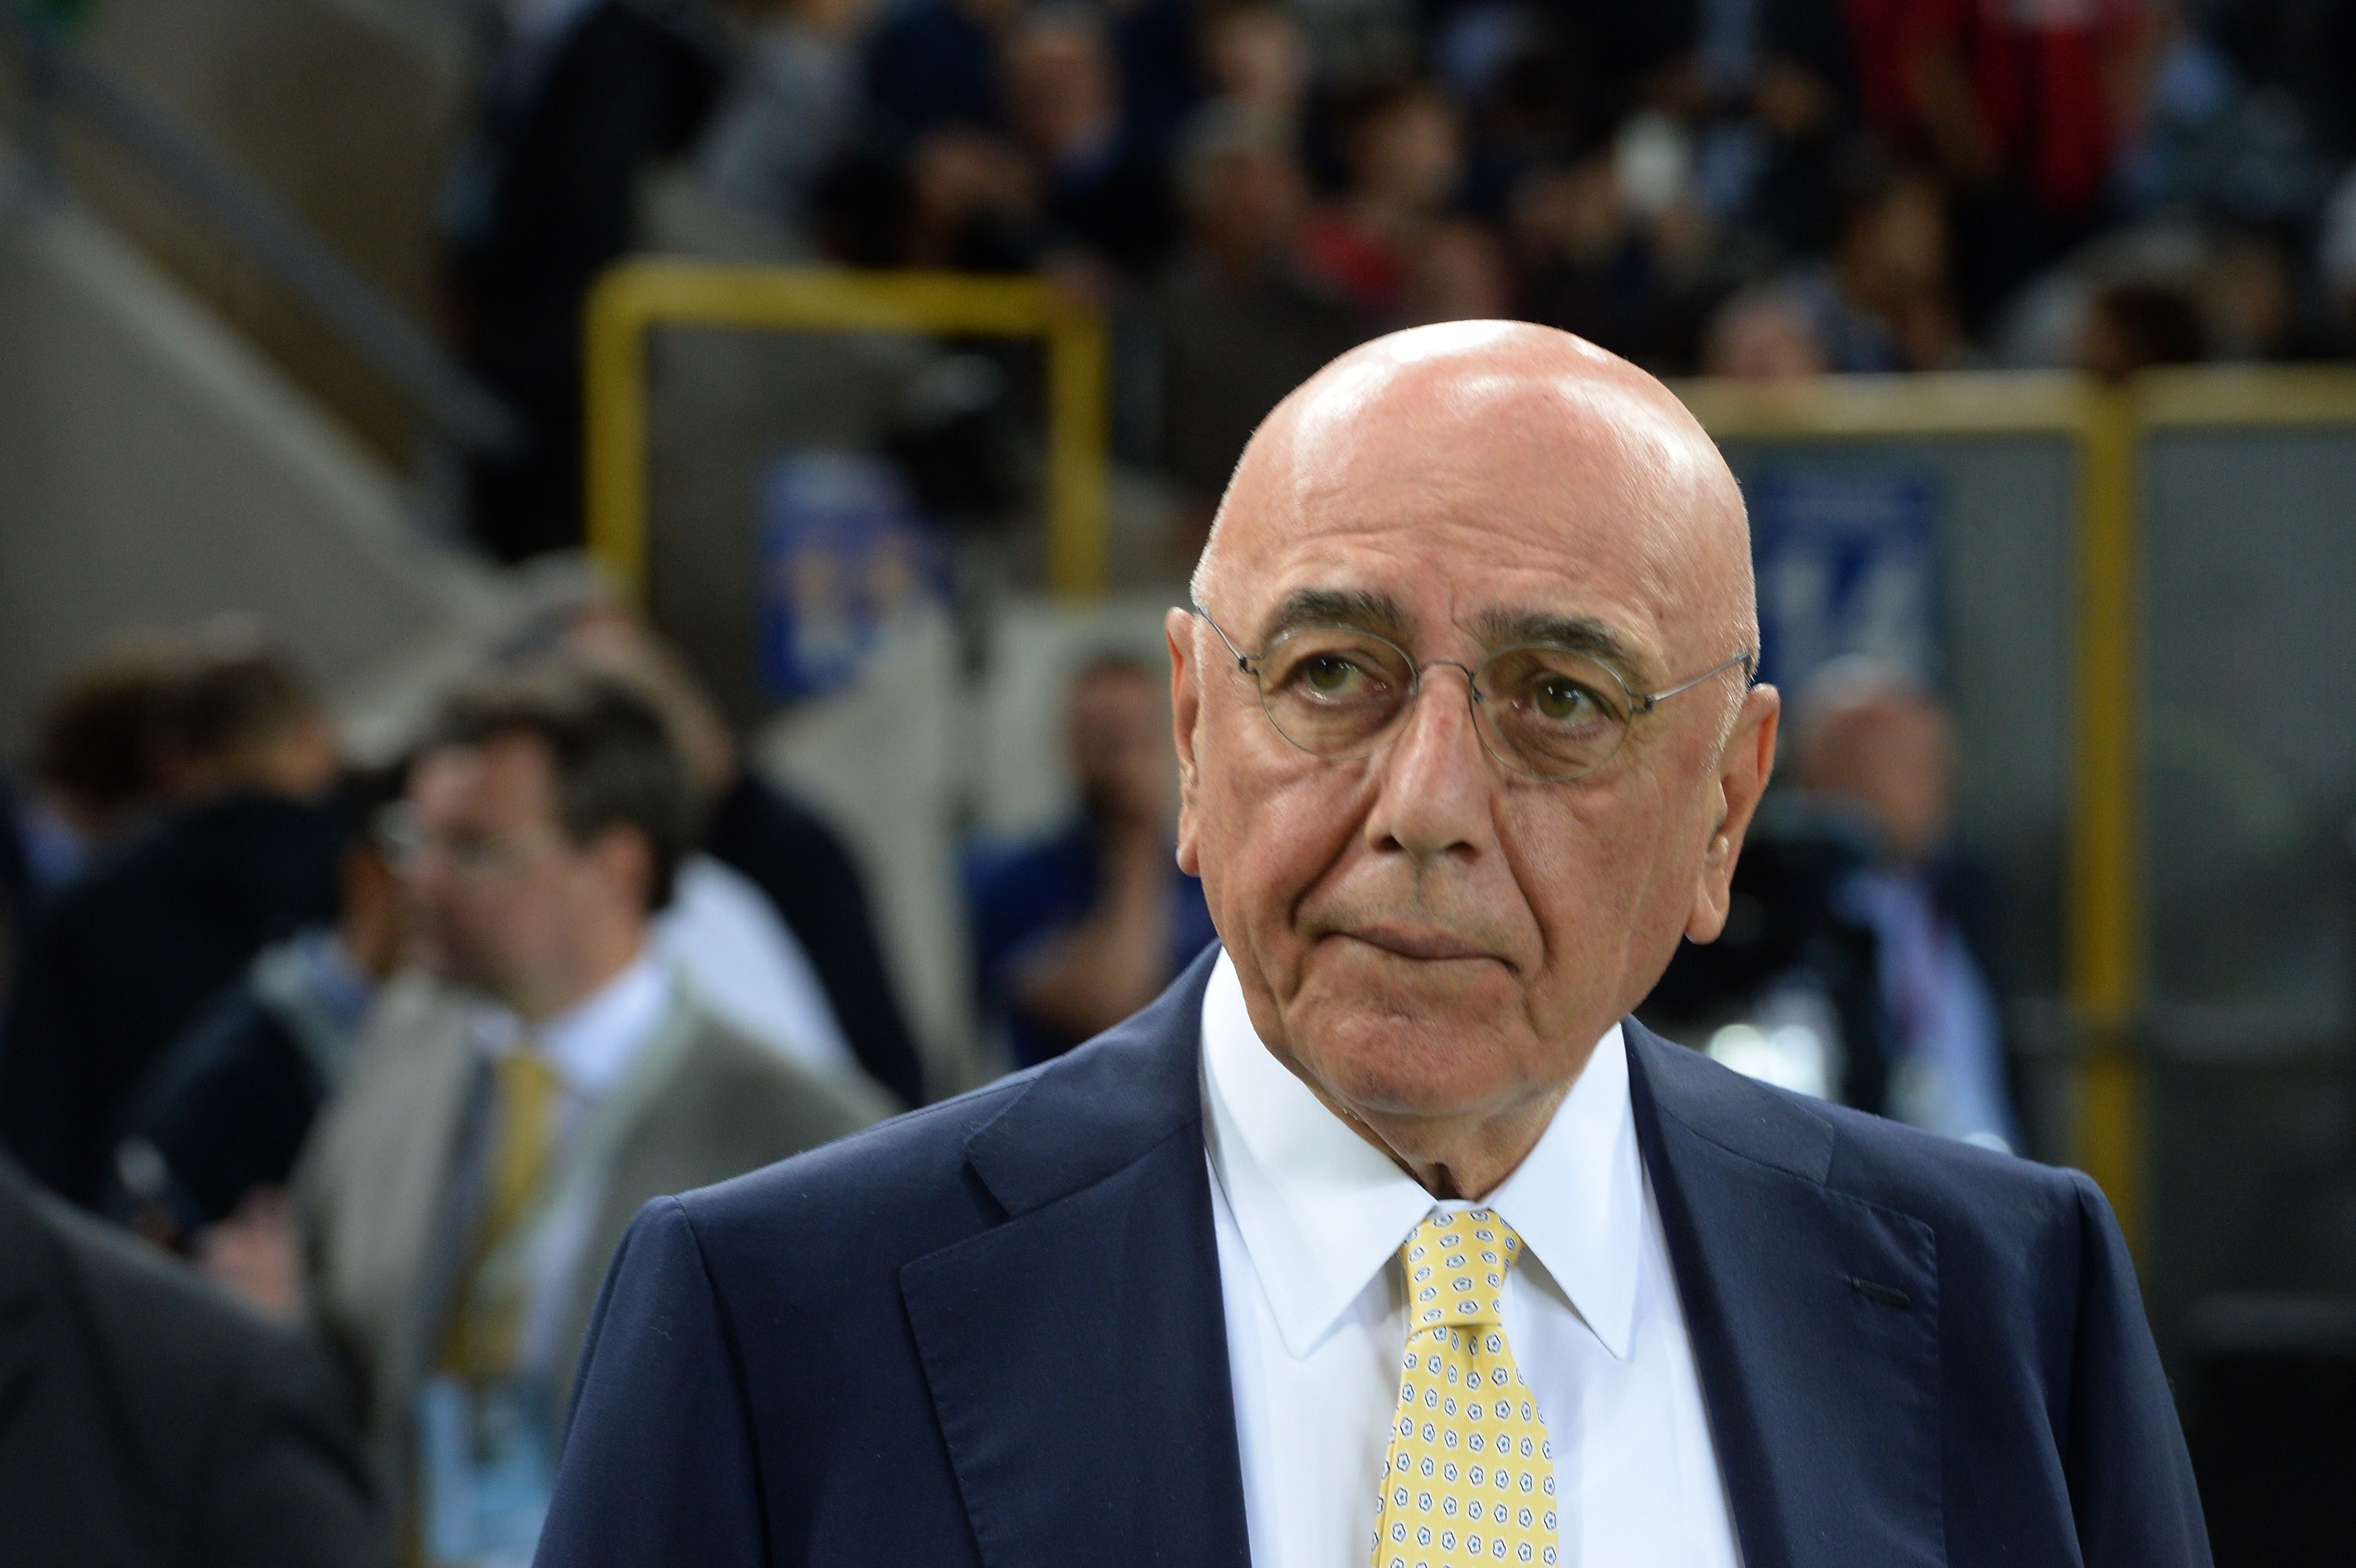 Galliani: Oliver is an idiot, he does not understand the philosophy of football